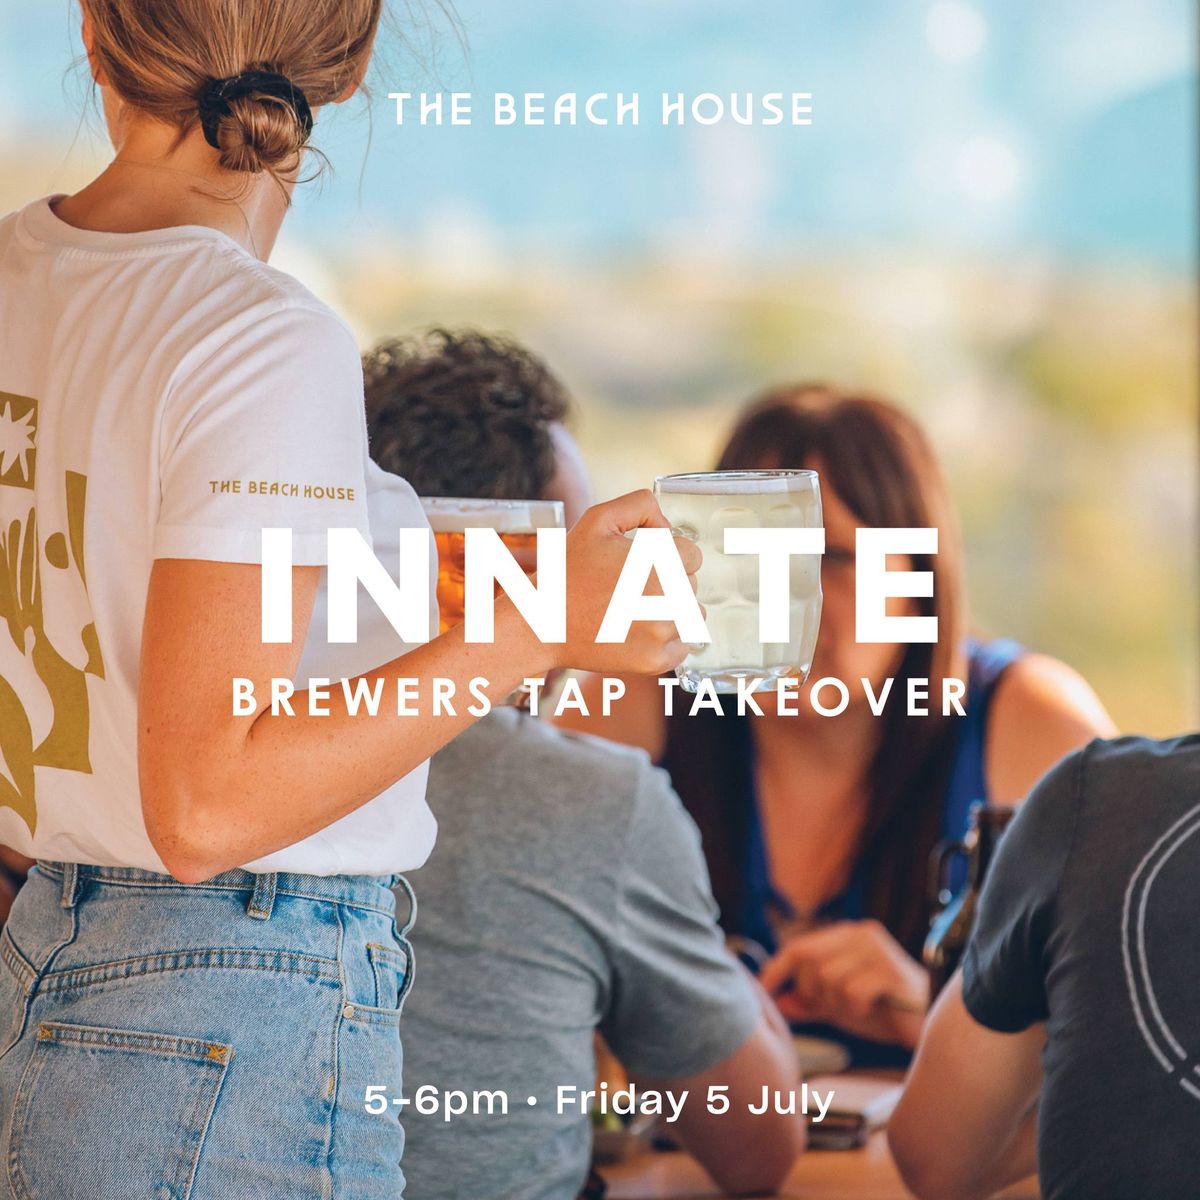 Innate Brewers Tap Takeover at The Beach House \ud83c\udf7b\ud83c\udf0a